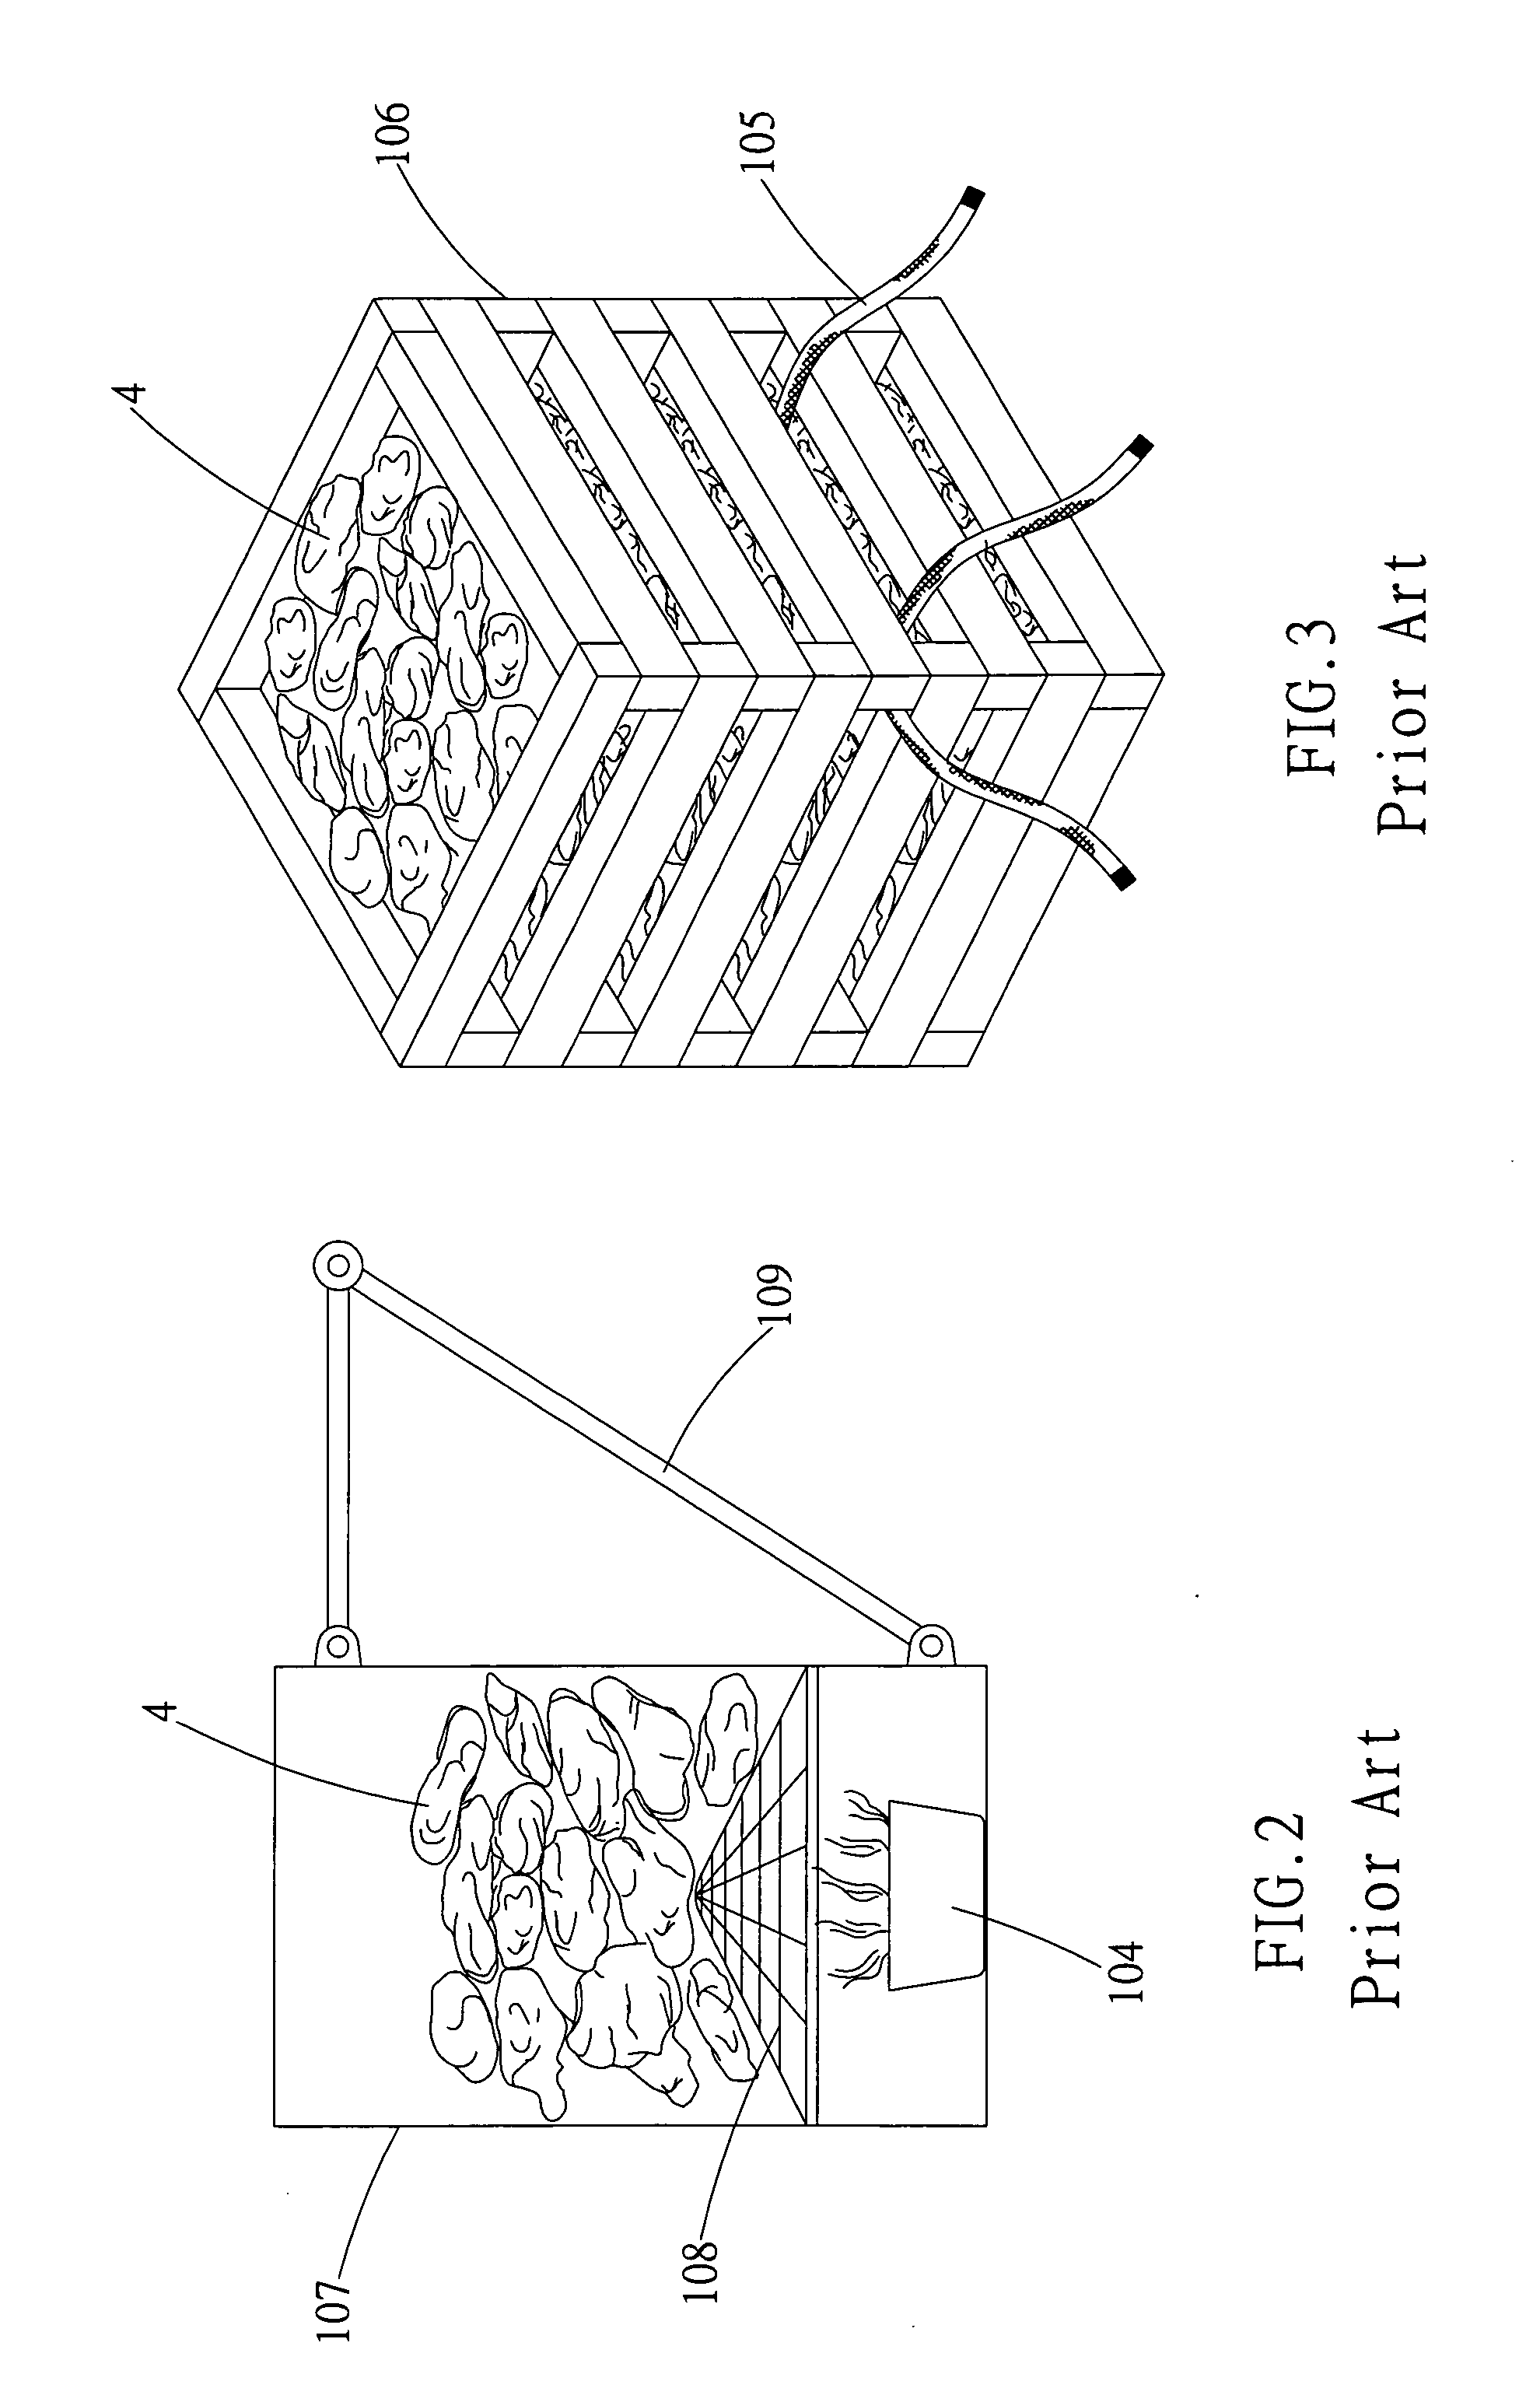 Carbon fuel combustion supporting packaging